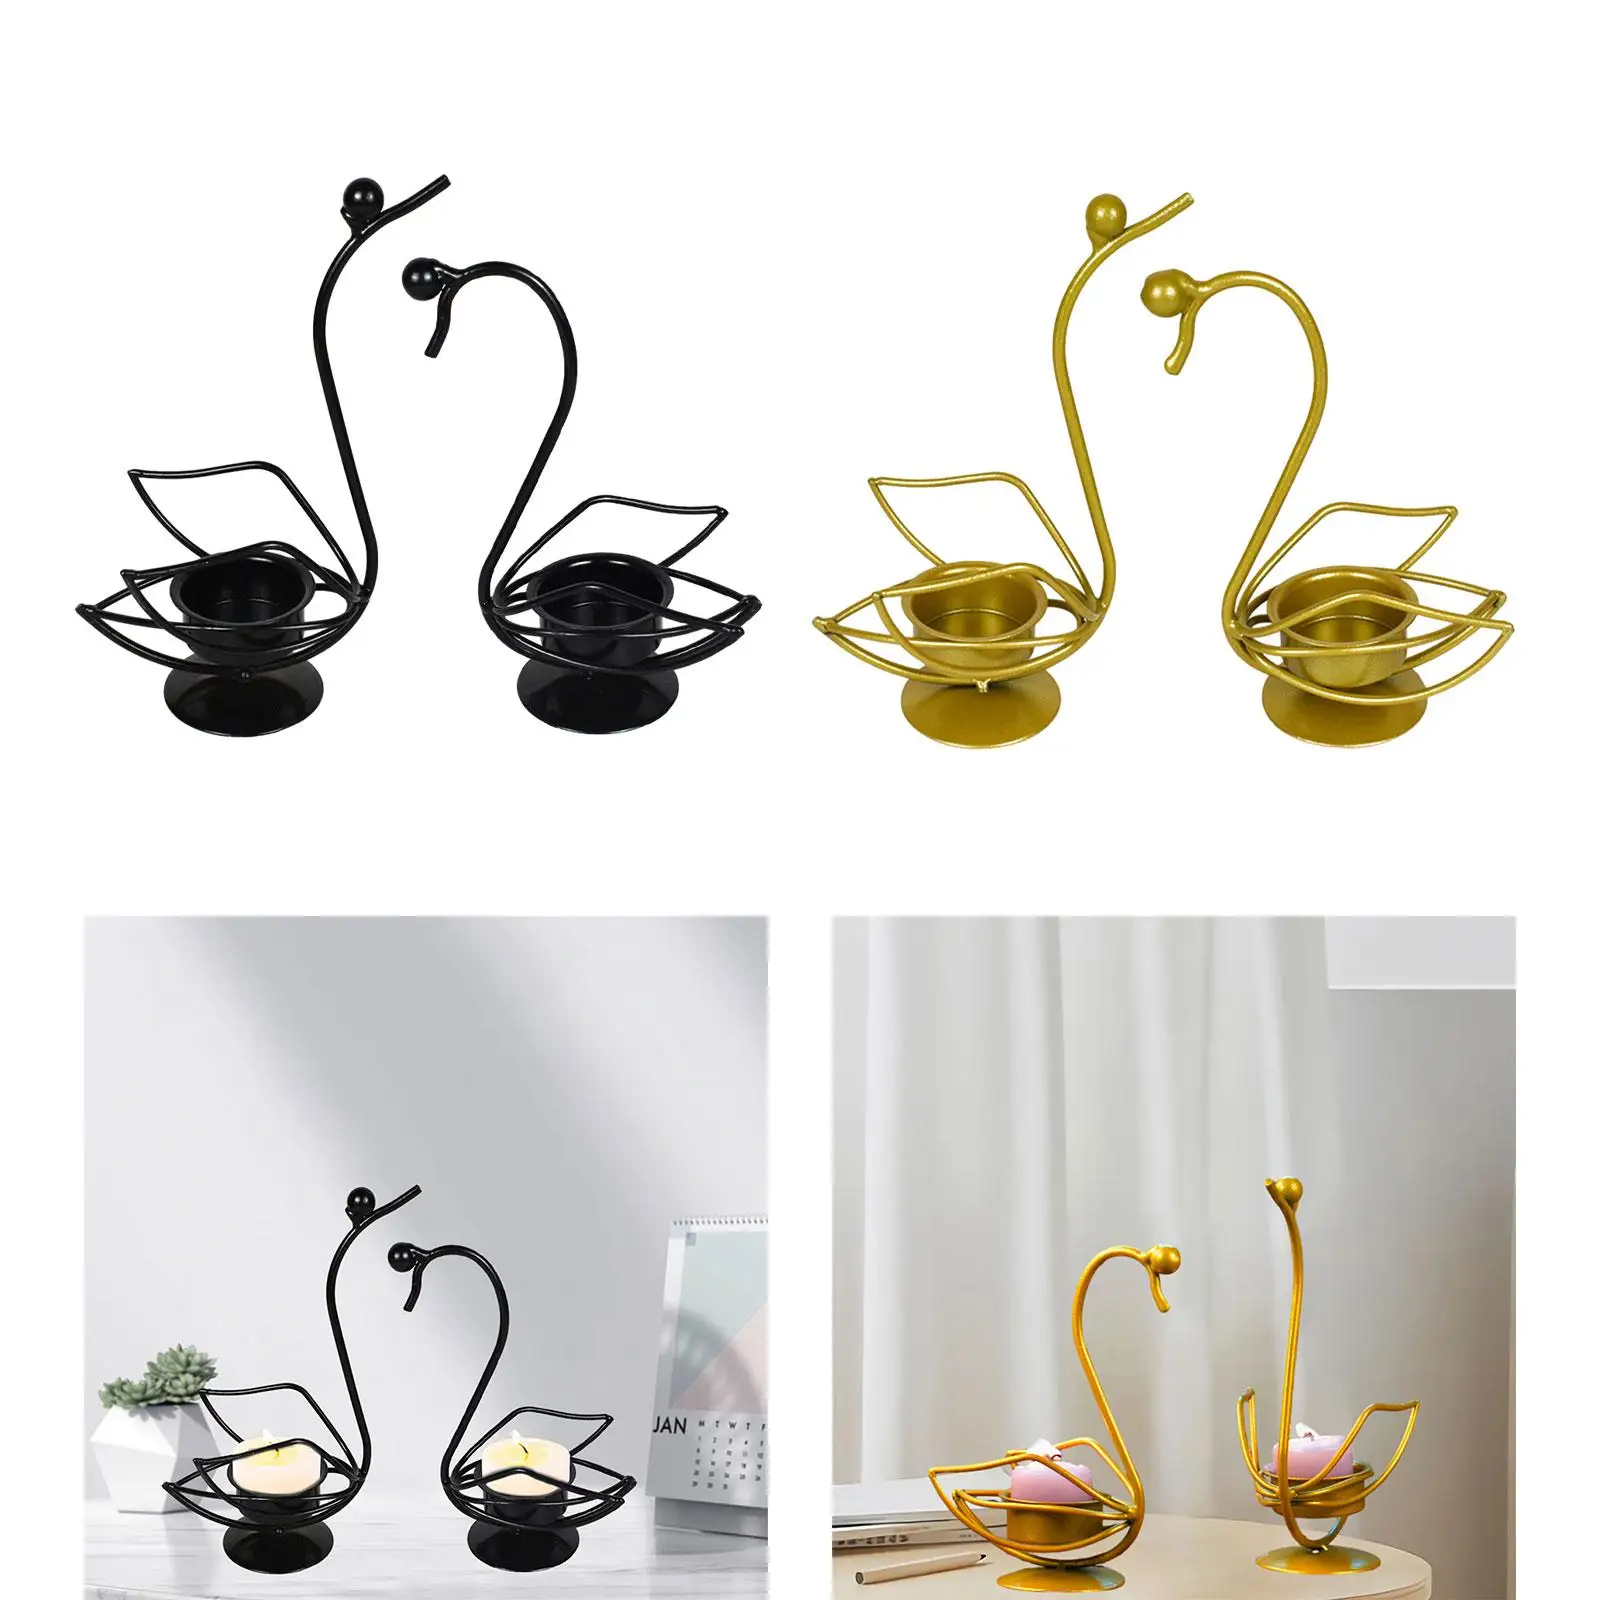 2Pcs Couple Swan Candle Holder Elegant Nordic Decorative Metal Candlestick for Home Table Centerpieces Office Holiday Decoration